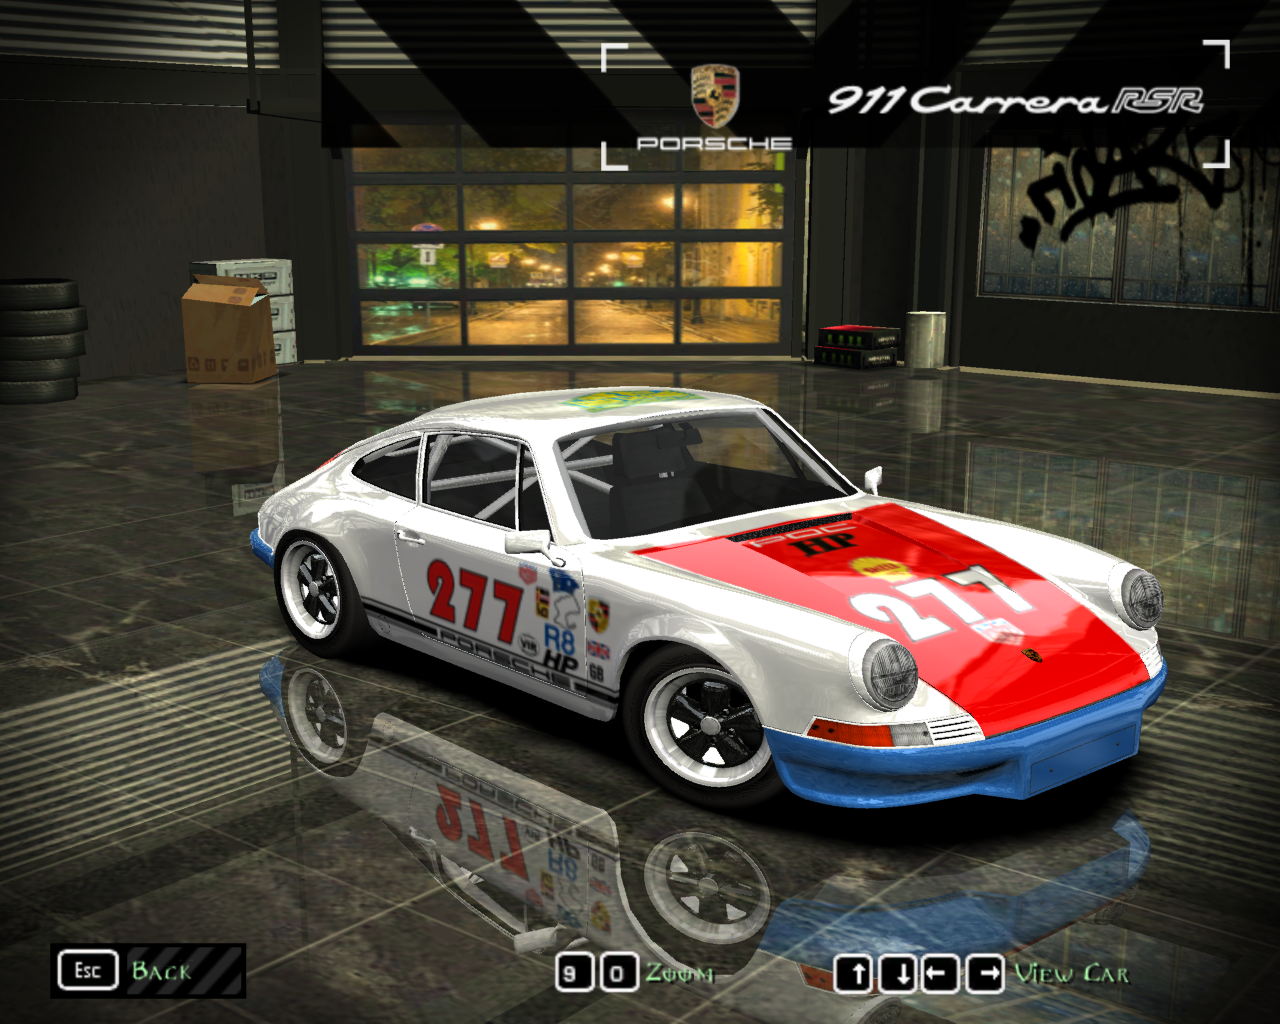 Need For Speed Most Wanted Porsche Magnus Walker´s 277 and Carrera side stripes   512x-1024x